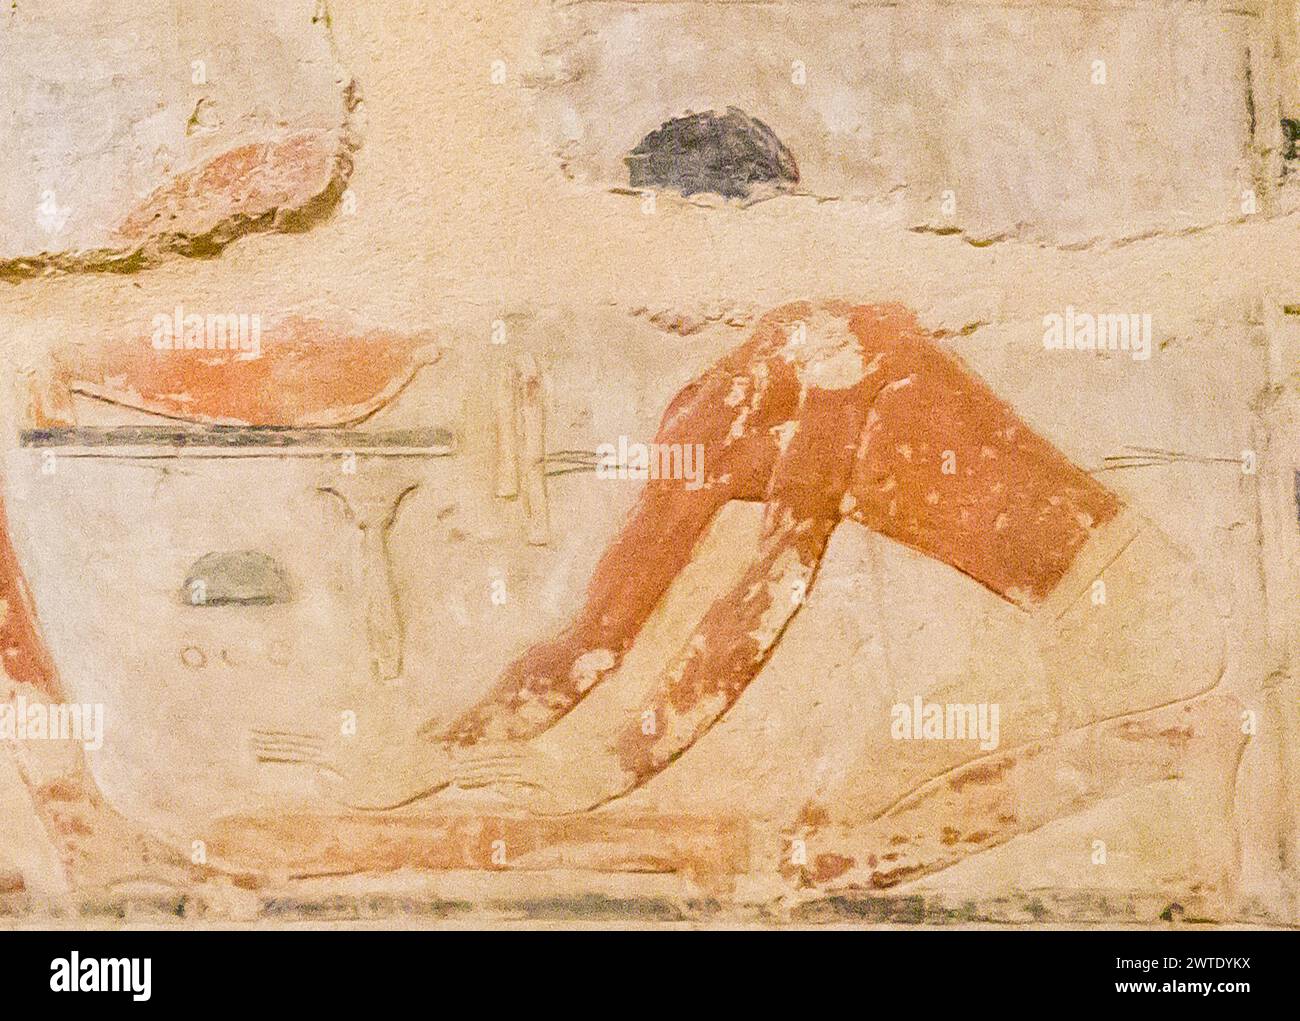 Egypt, Saqqara, tomb of Ty, brewery scenes : Knead the dough, action called 'knead the green bread'. Stock Photo